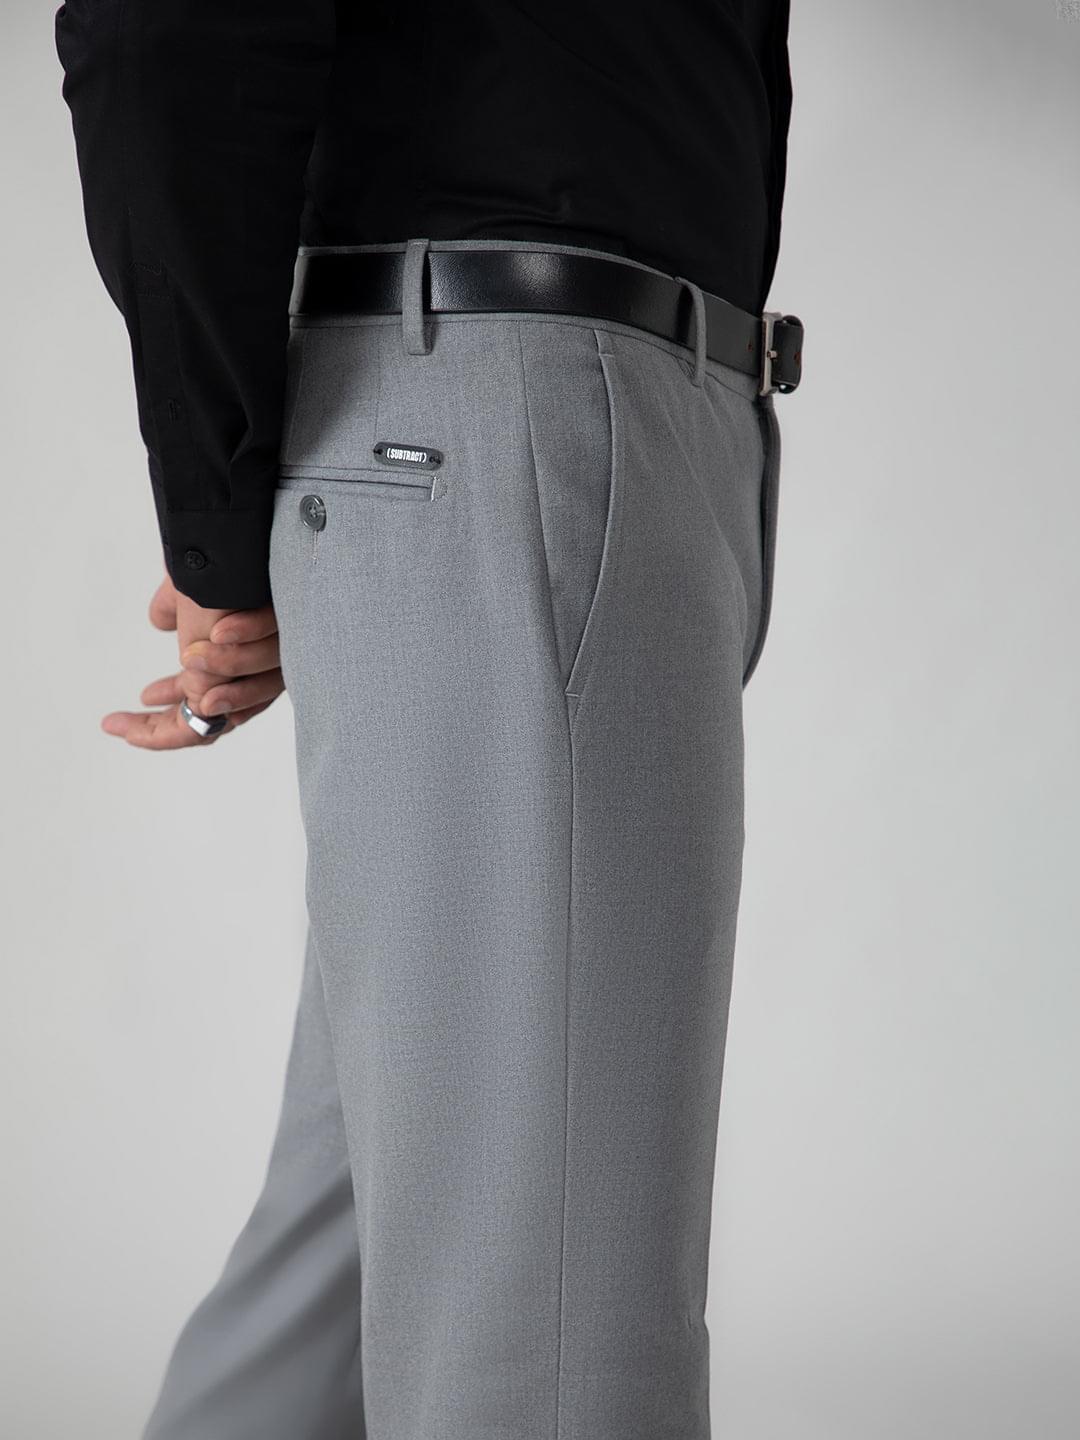 Textured Formal Trousers In Charcoal B95 Cairo